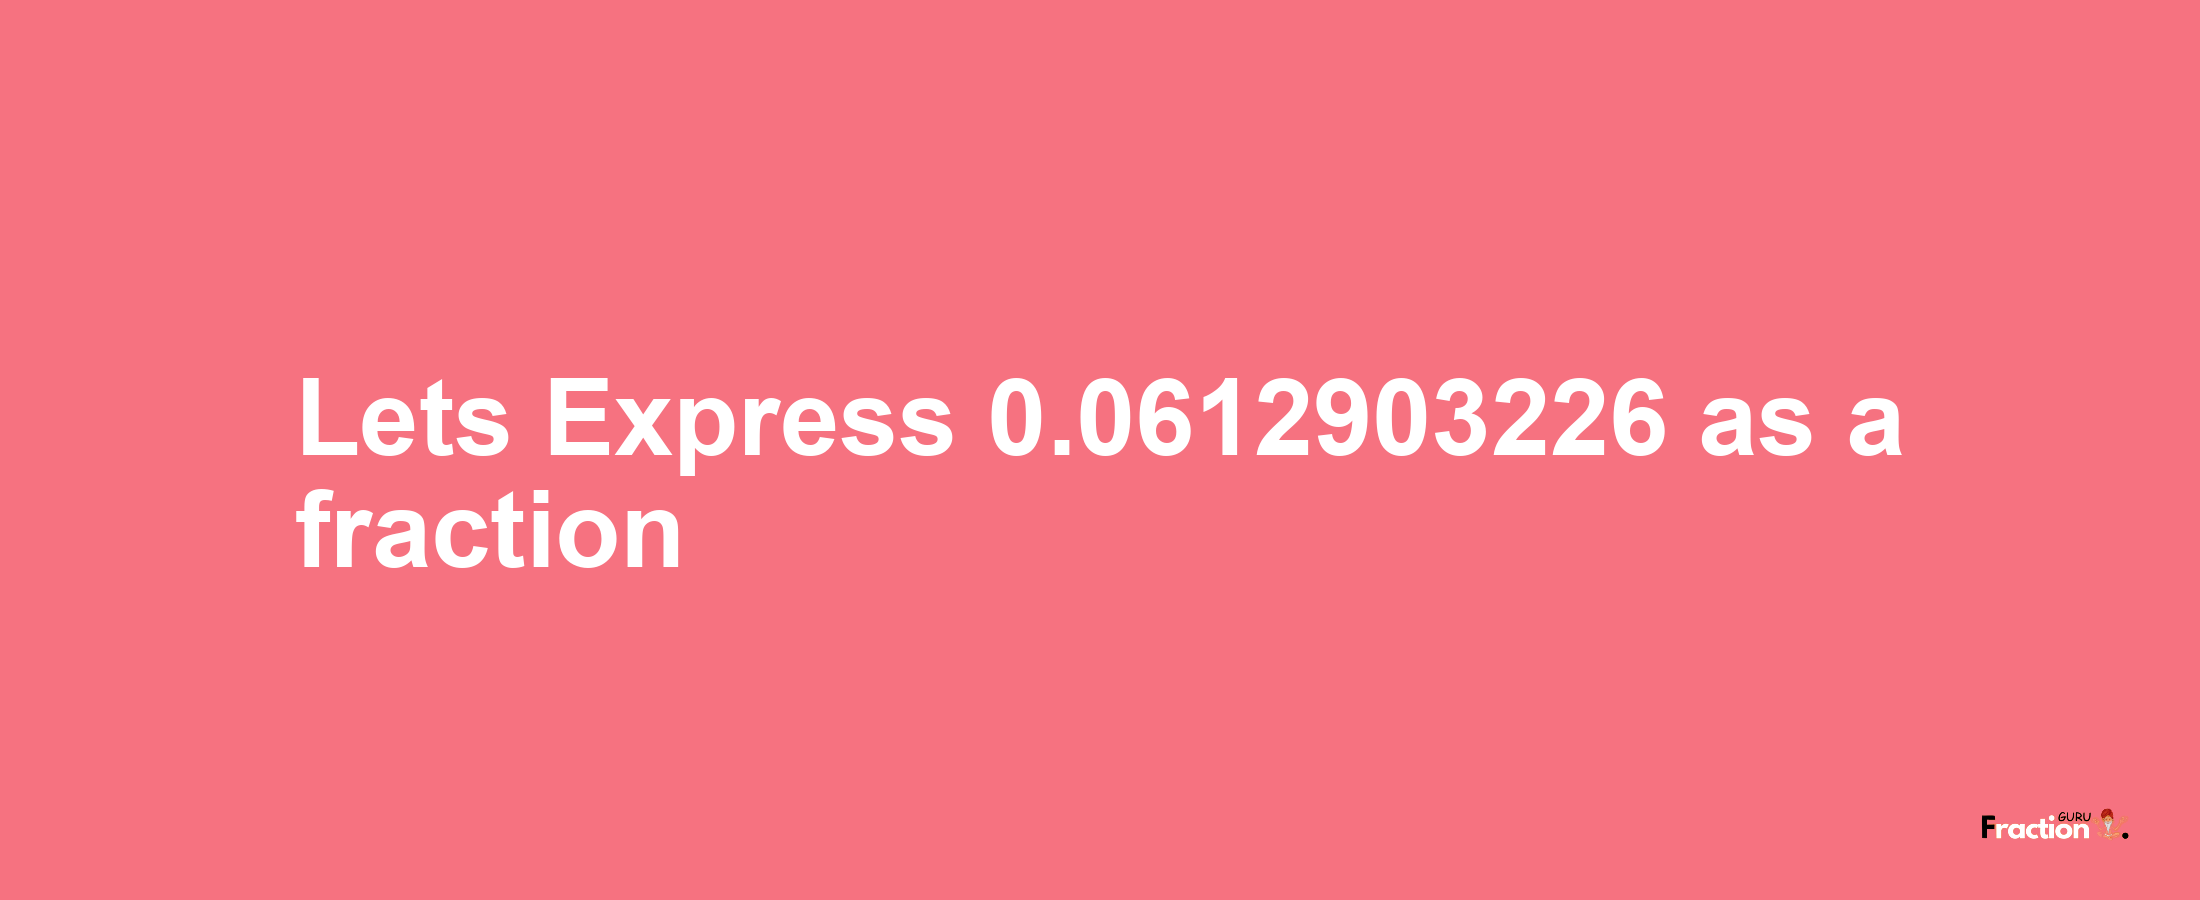 Lets Express 0.0612903226 as afraction